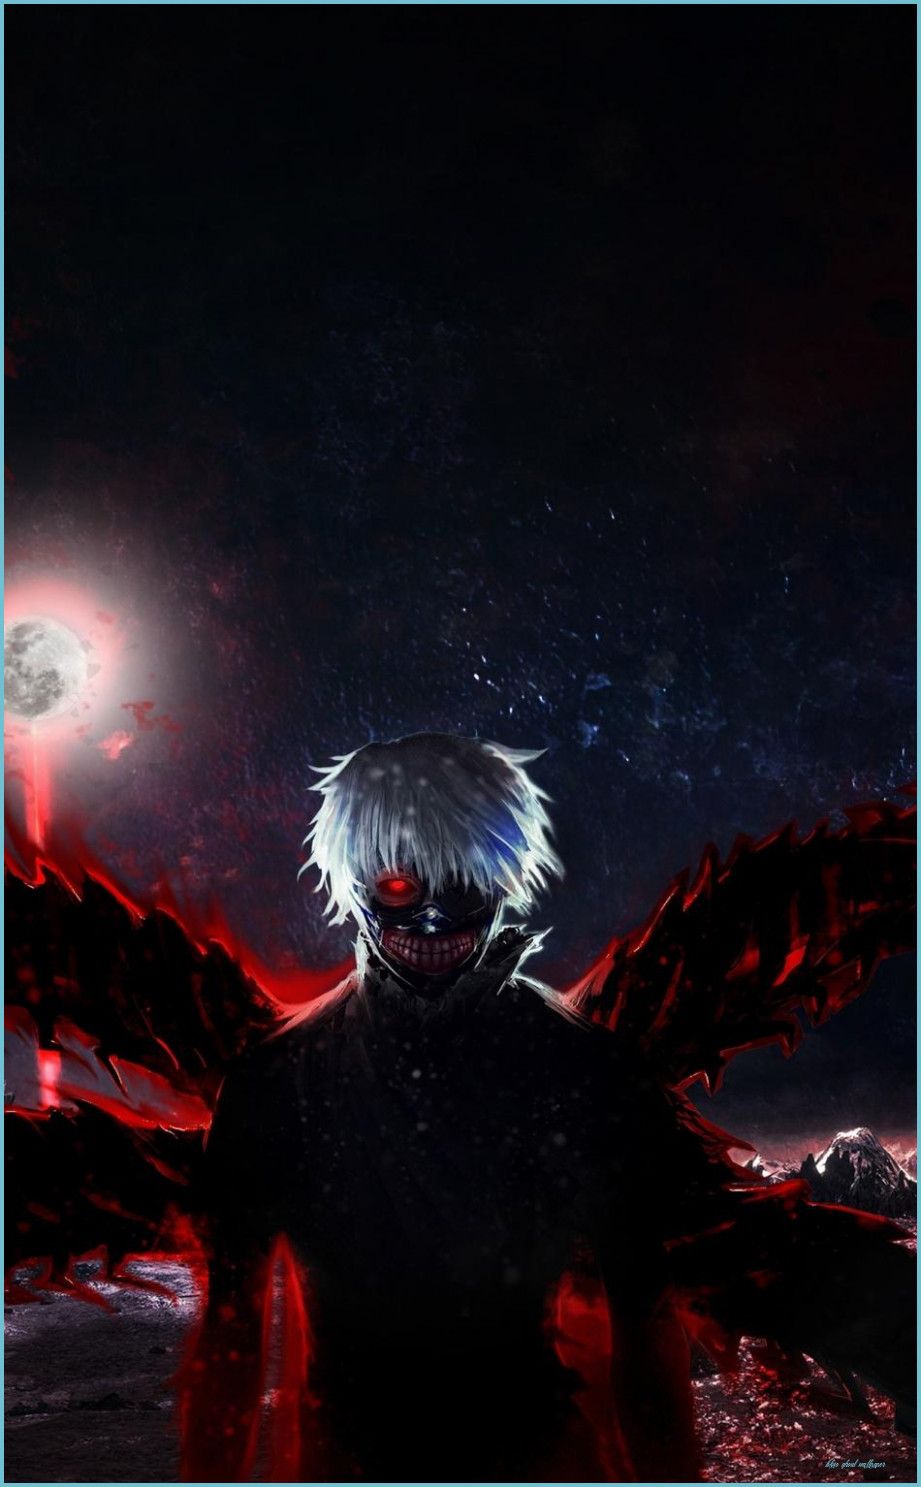 How Tokyo Ghoul Wallpaper Is Going To Change Your Business